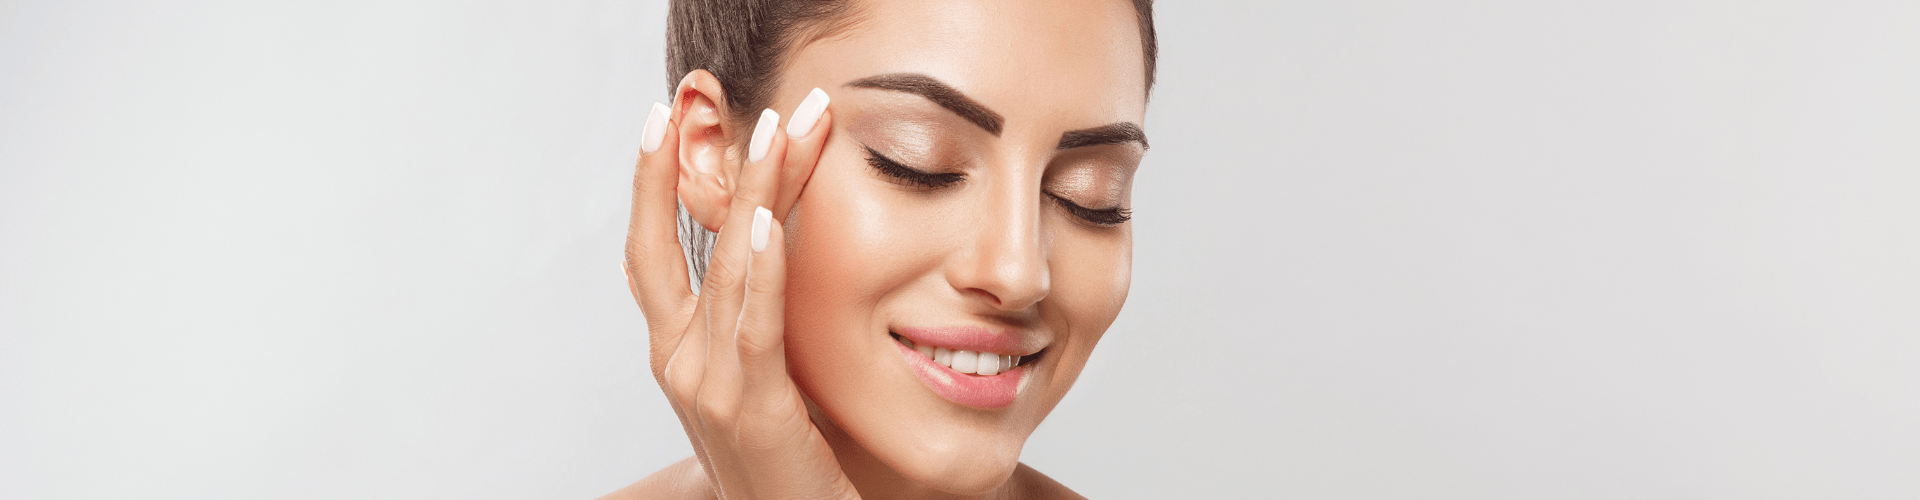 Image of a woman with a serene expression, gently touching her face with her fingers. She has well-groomed eyebrows, long eyelashes, and a healthy complexion, indicative of skincare or beauty treatment. The background is a neutral, light color, emphasizing her flawless skin.